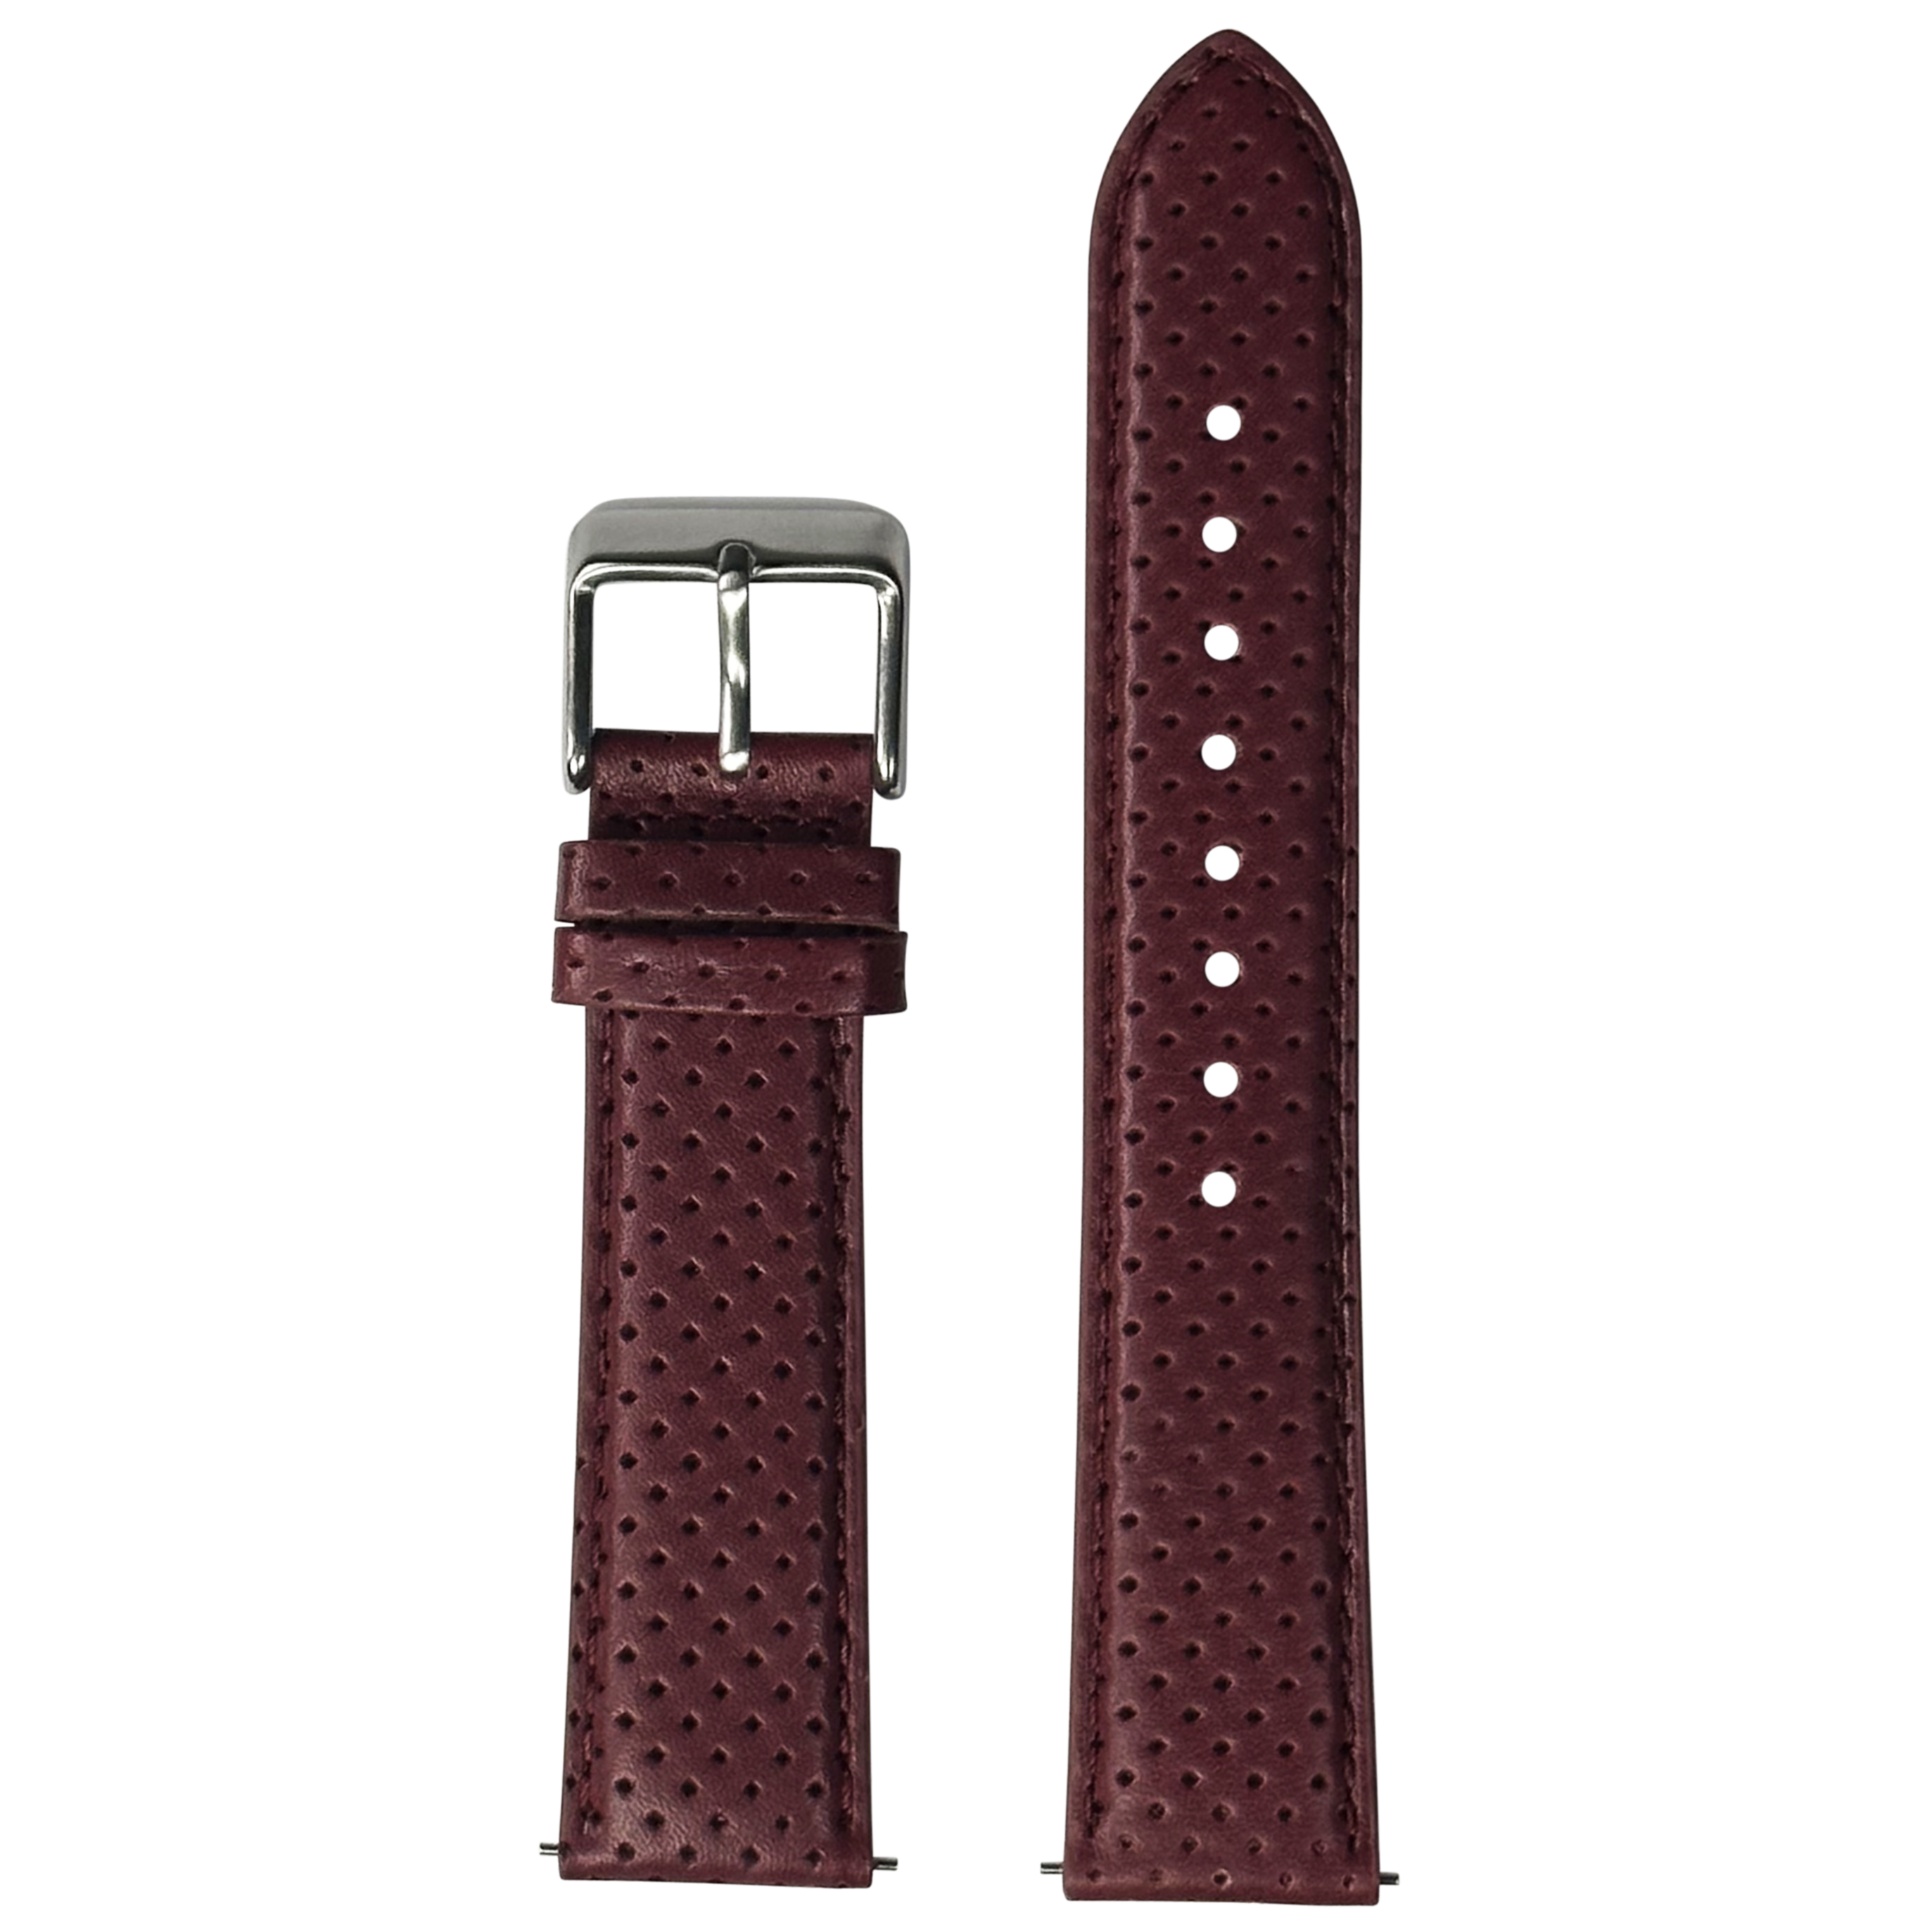 [QuickFit] Perforated Racing Leather Straps - Maroon 20mm